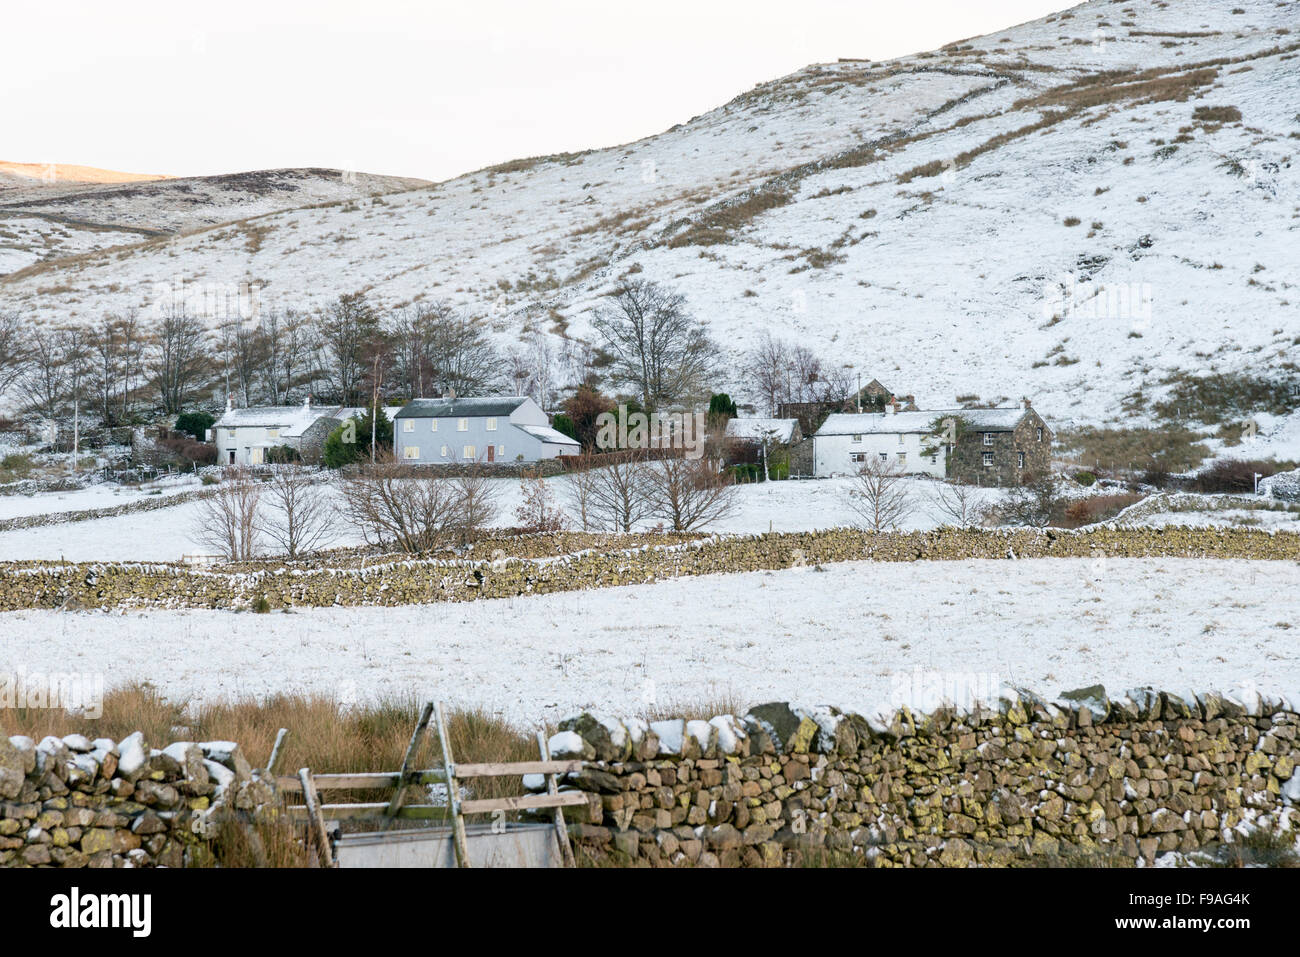 A snowy landscape of Cumbrian farms, buildings and mountains near Matterdale in Cumbria UK Stock Photo